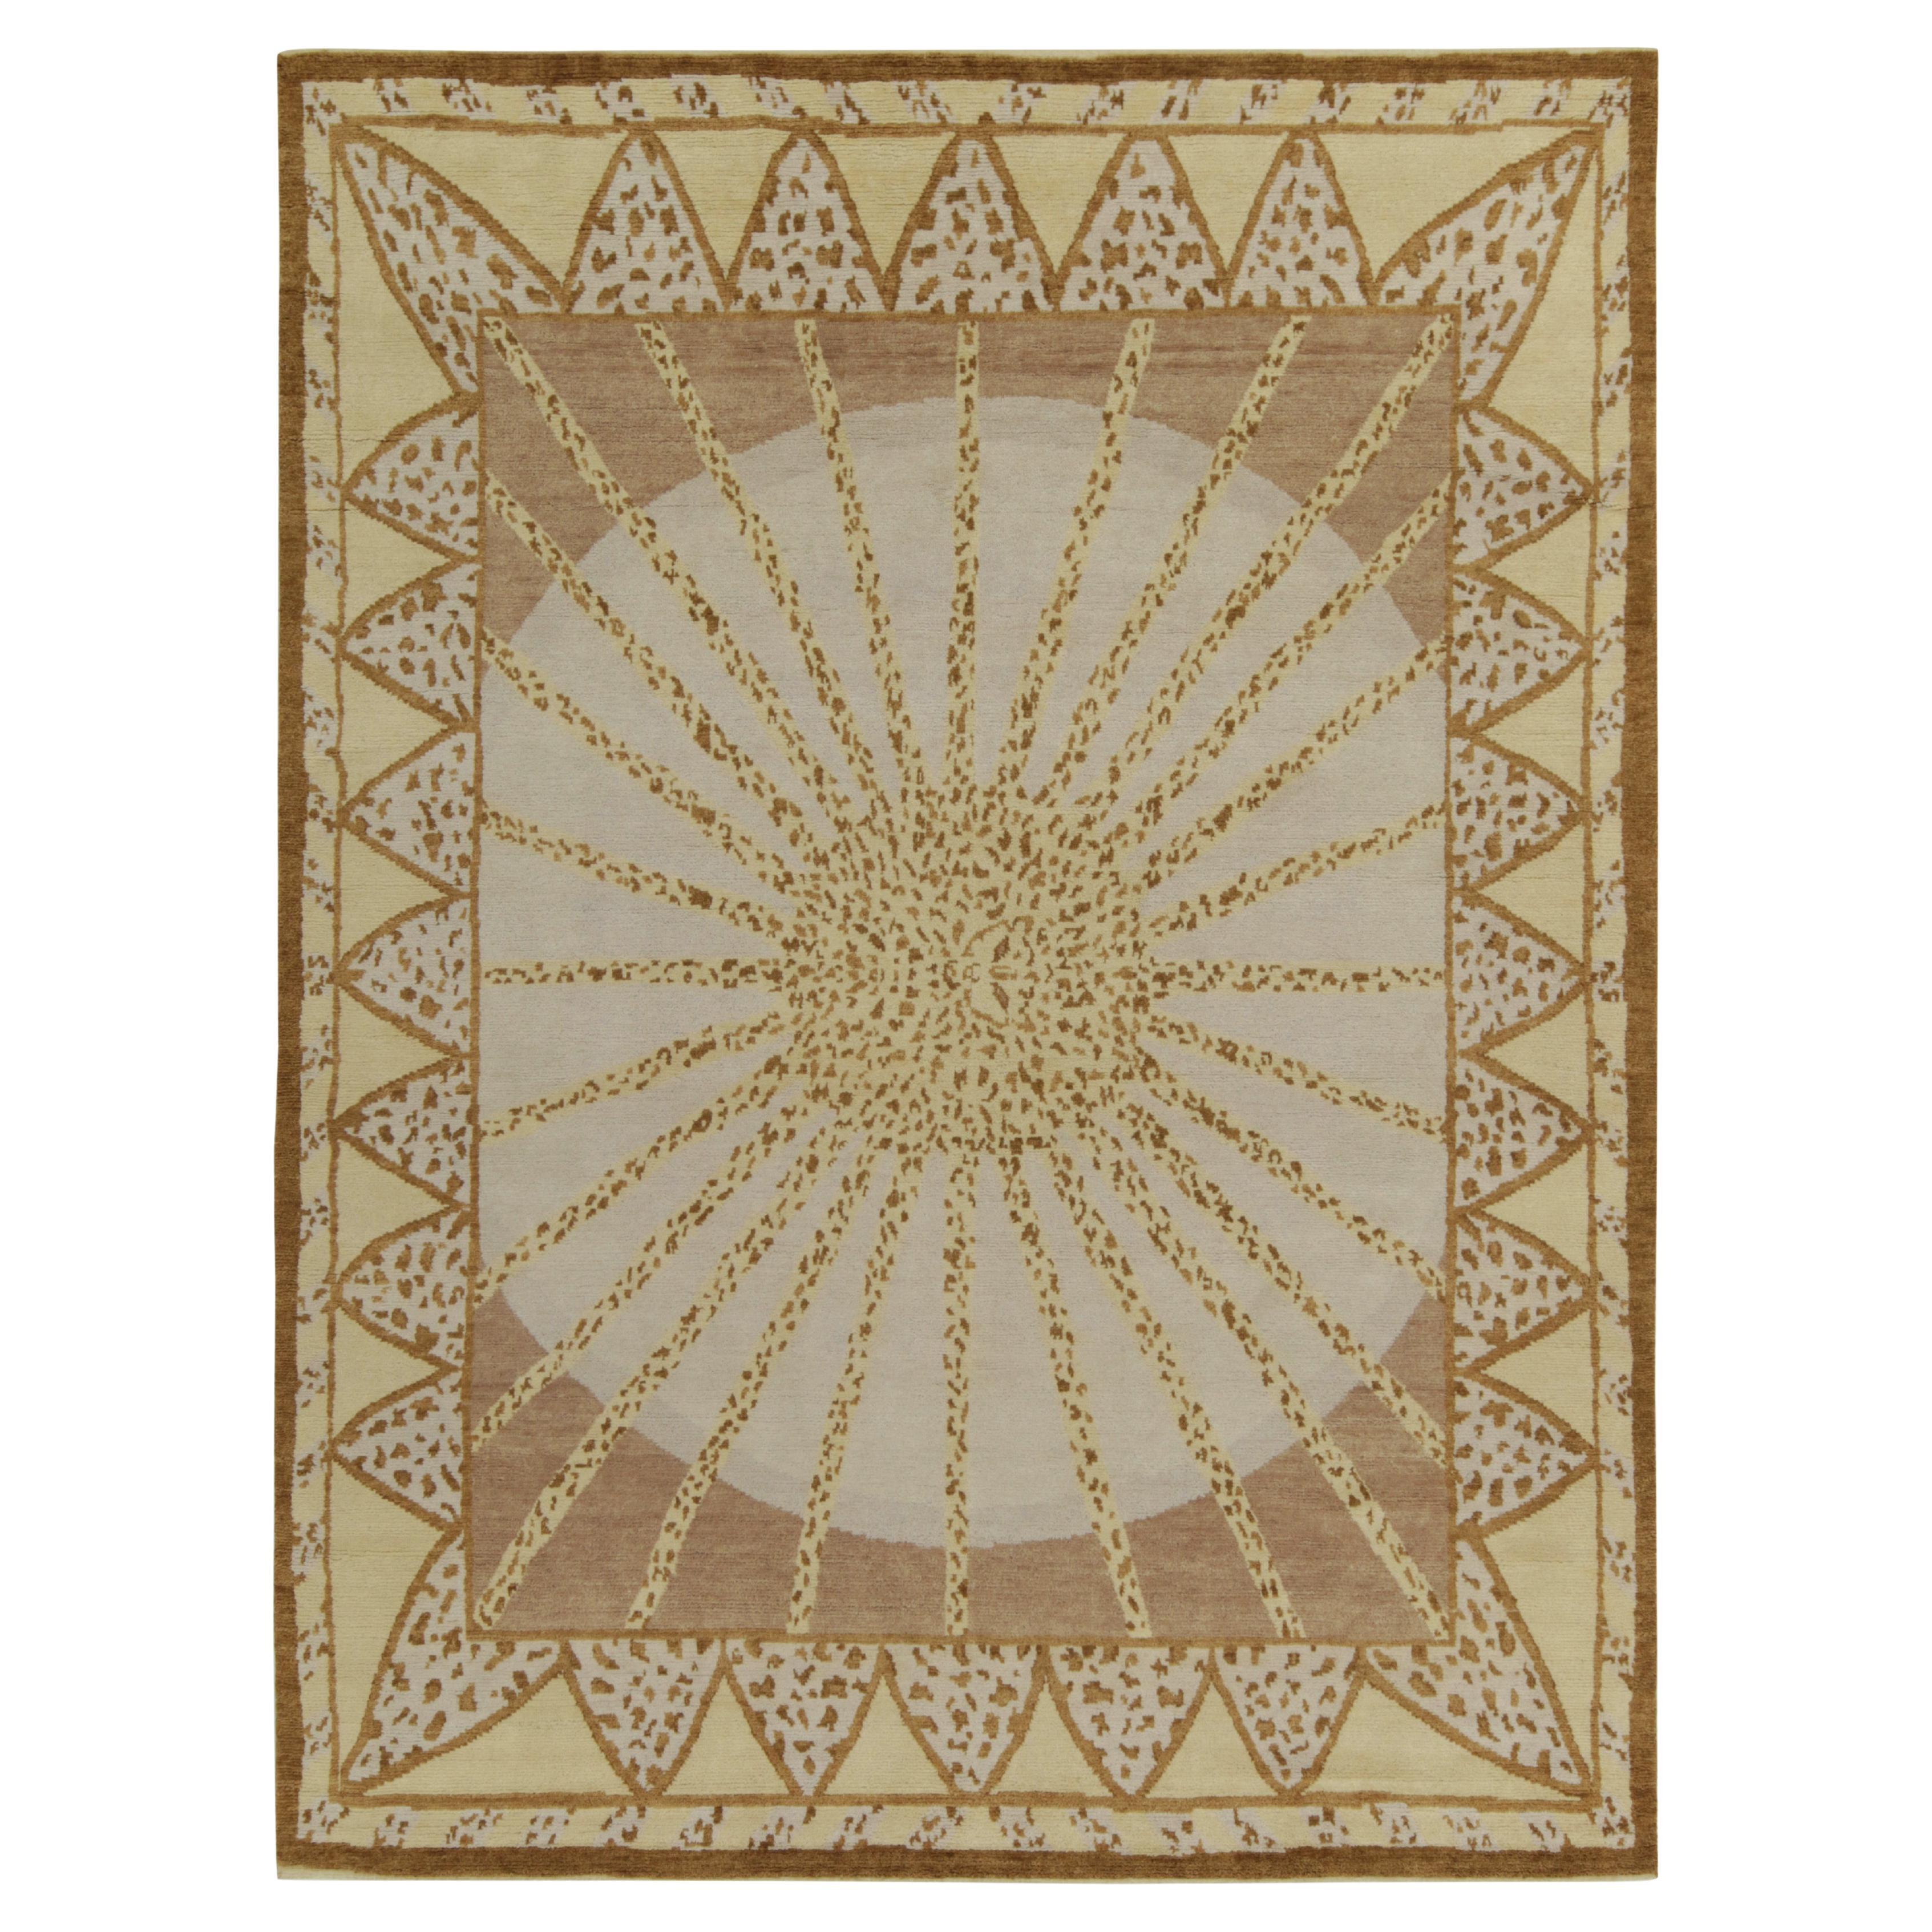 Rug & Kilim’s French Deco Style Rug in Goldenrod and Beige-Brown Patterns